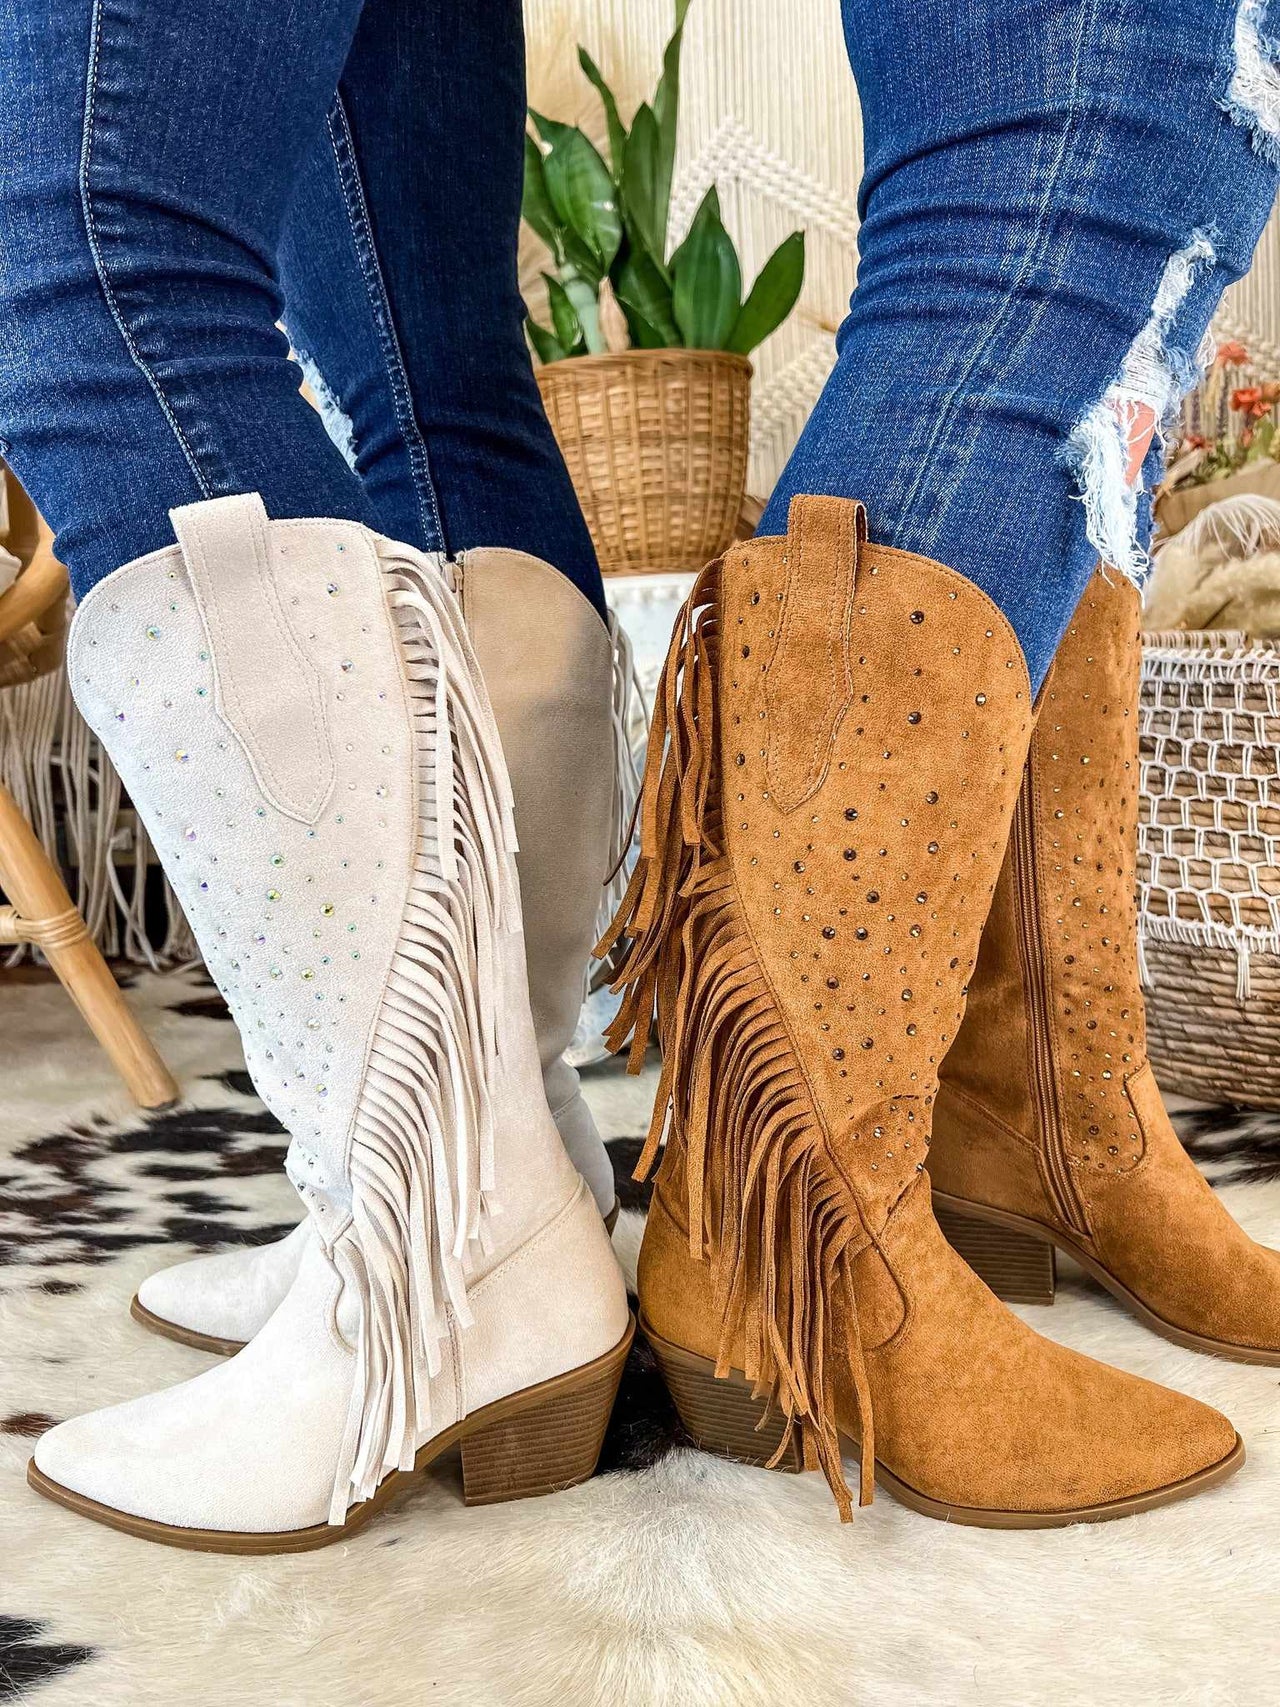 Wide leg suede boots with fringe.